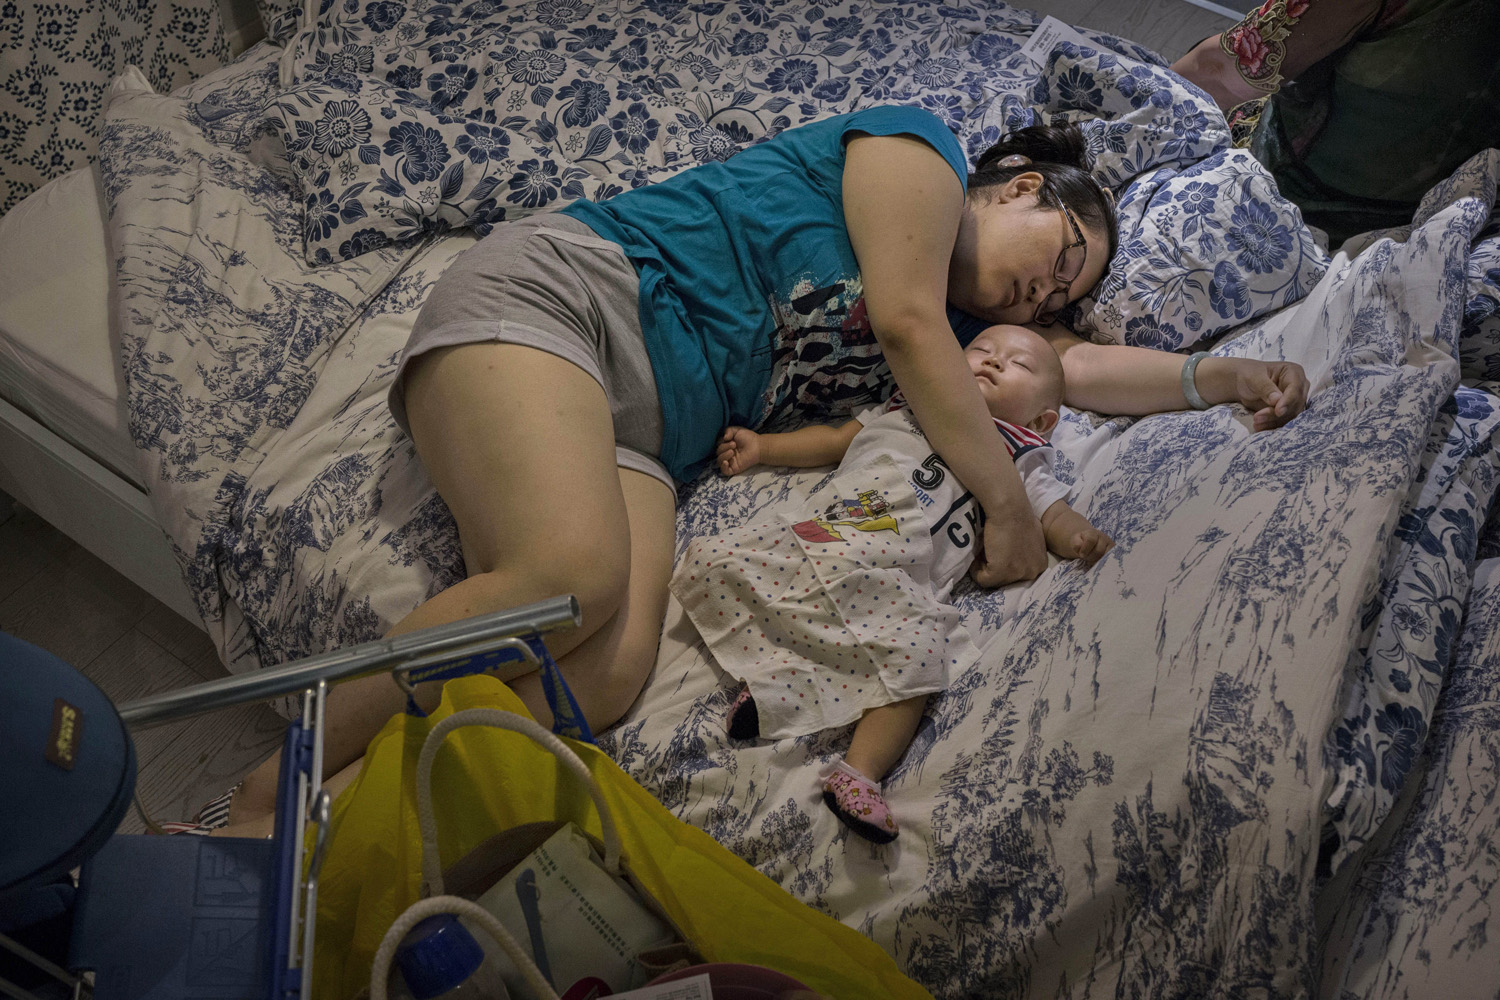 A Chinese shopper sleeps with her child on a bed in the showroom of the IKEA store in Beijing on July 6, 2014.